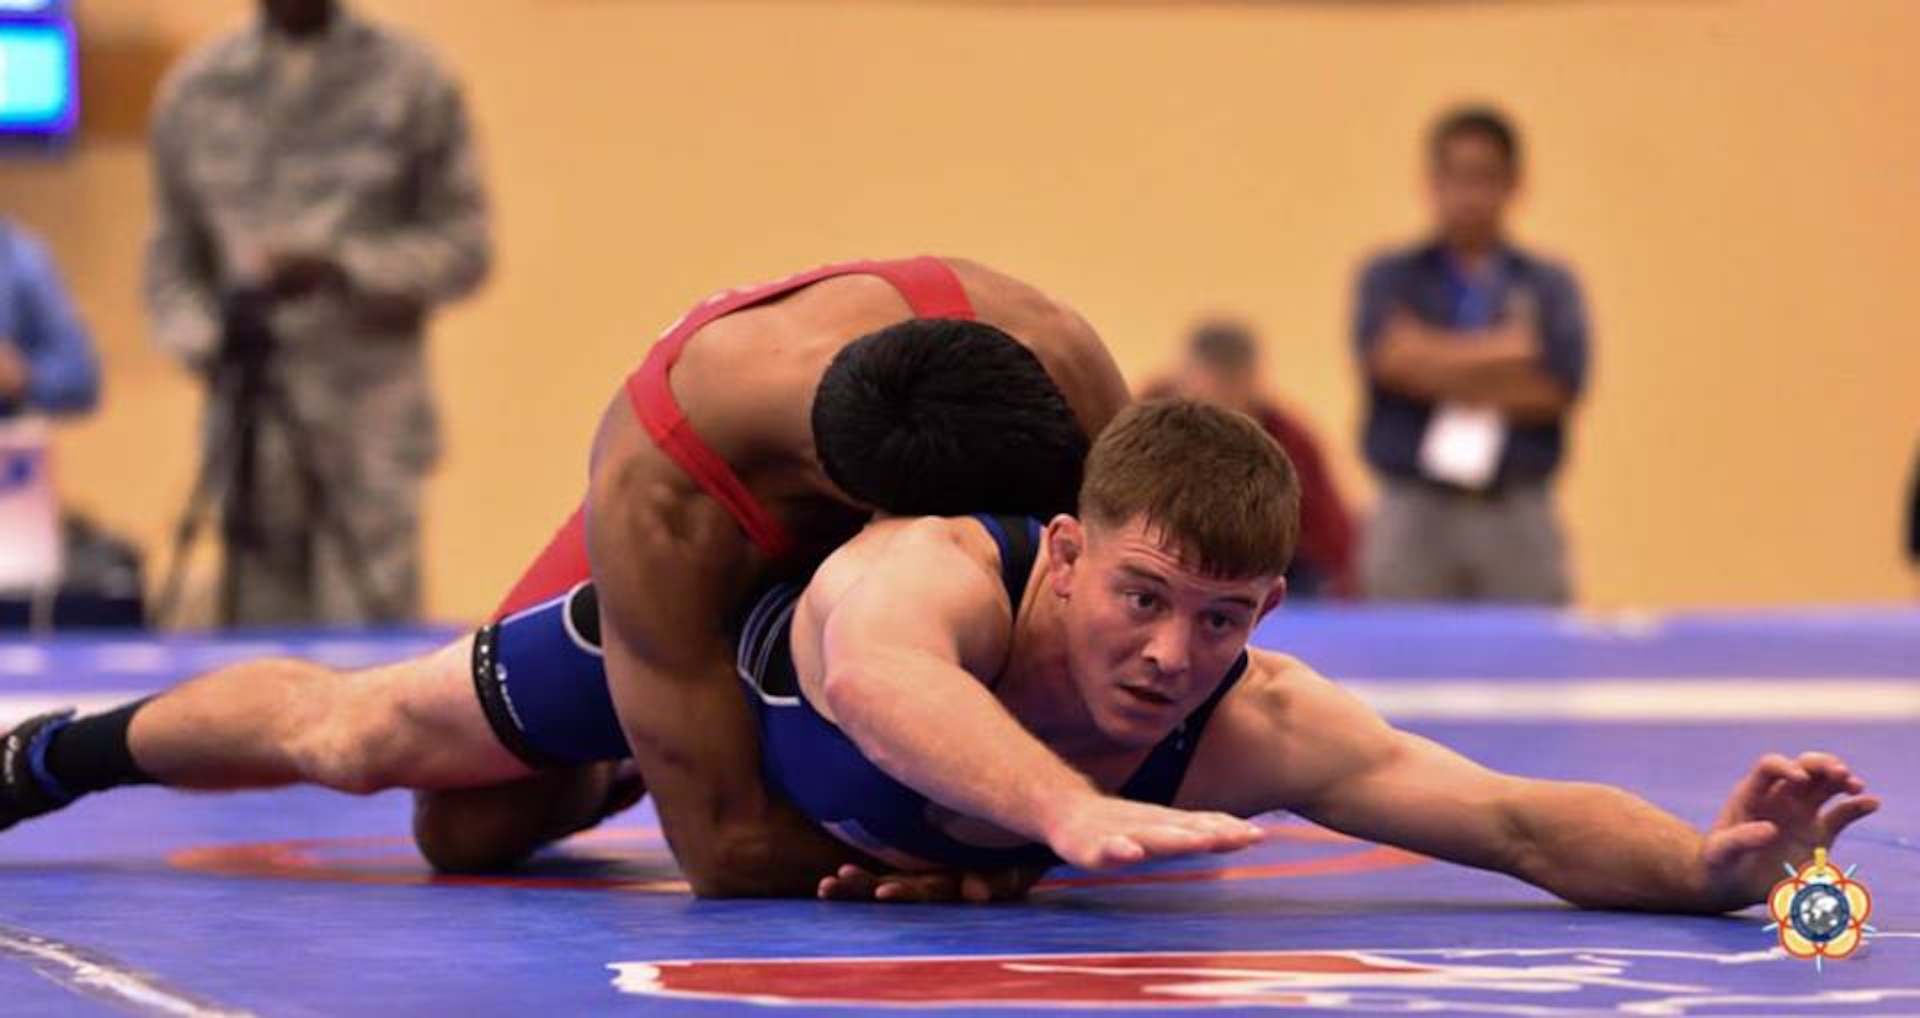 Marine Corps 1st Lt. Bryce Saddoris (blue) during his silver medal performance in the 66kg Greco-Roman competition at the 29th CISM World Military Wrestling Championship at Joint Base McGuire-Dix-Lakehurst, NJ 1-8 October 2014.